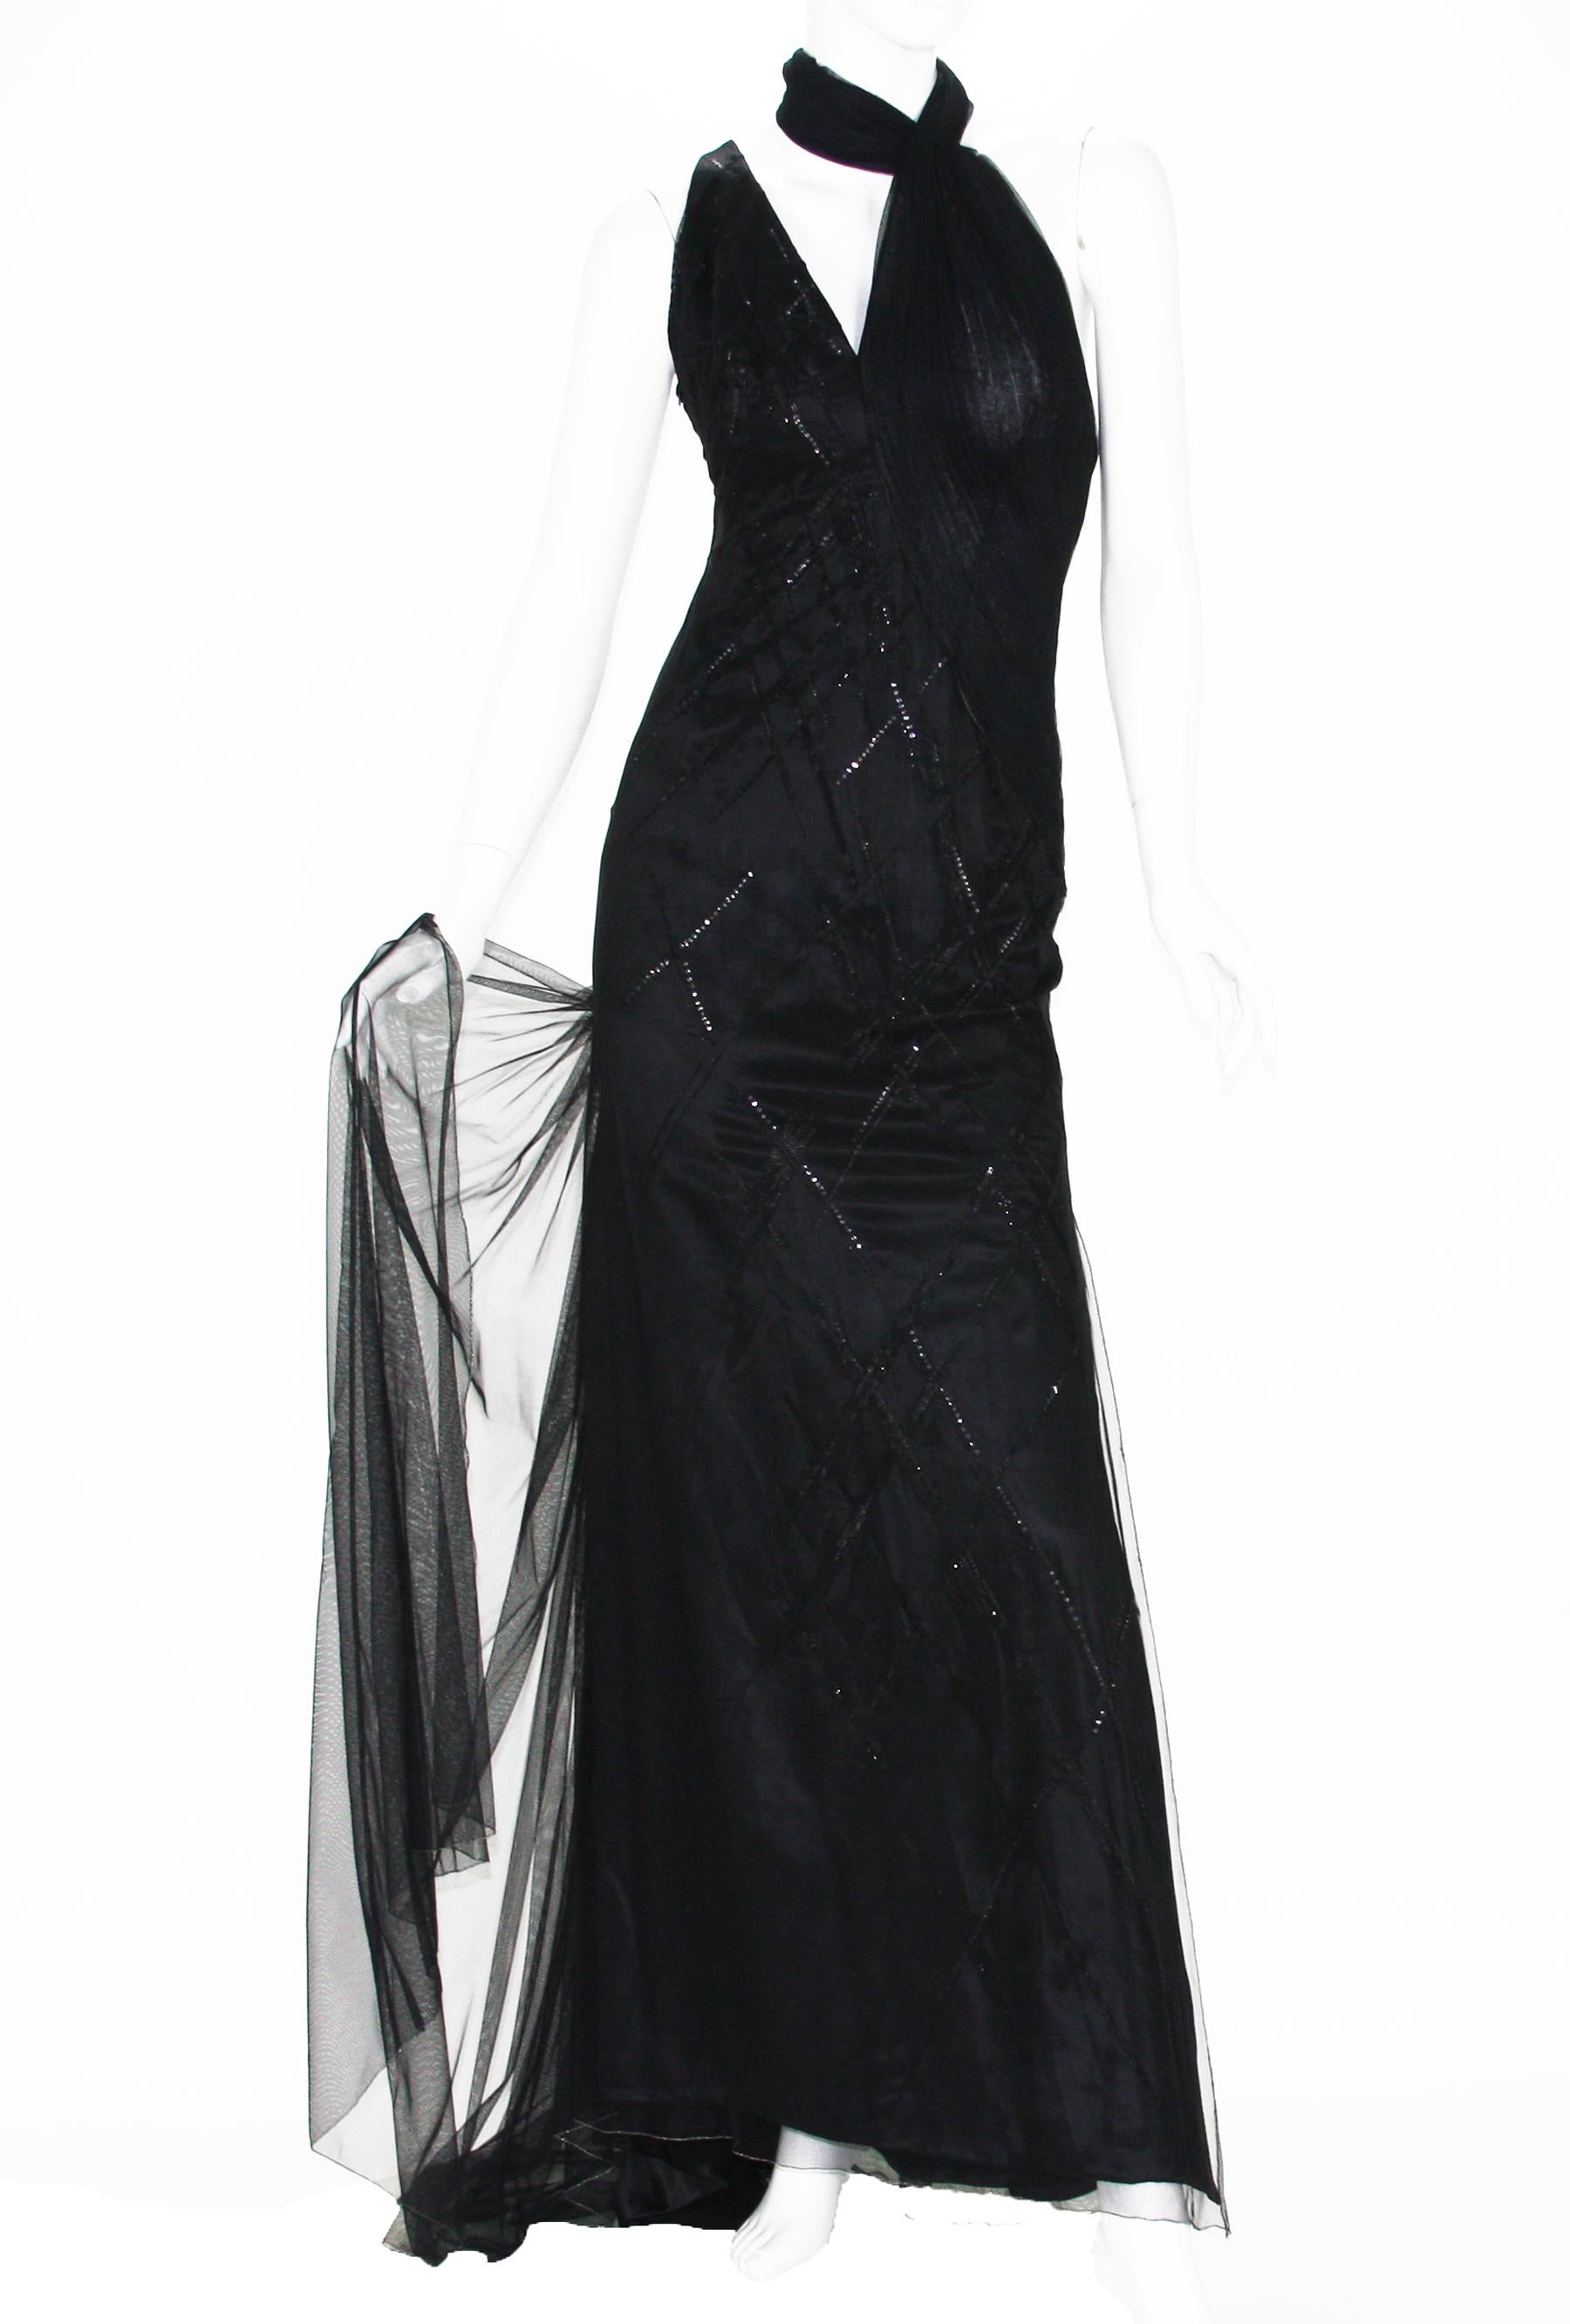 Versace Atelier Black Embellished Tulle Long Dress Gown
Circa 90's 
Designer size 42 - please check measurements
Jet Black Silk Embellished with Beads and Sequins, Black Tulle Covered Whole Gown, Plisse Accent, Built in Leotard Bottom Underlay, Side